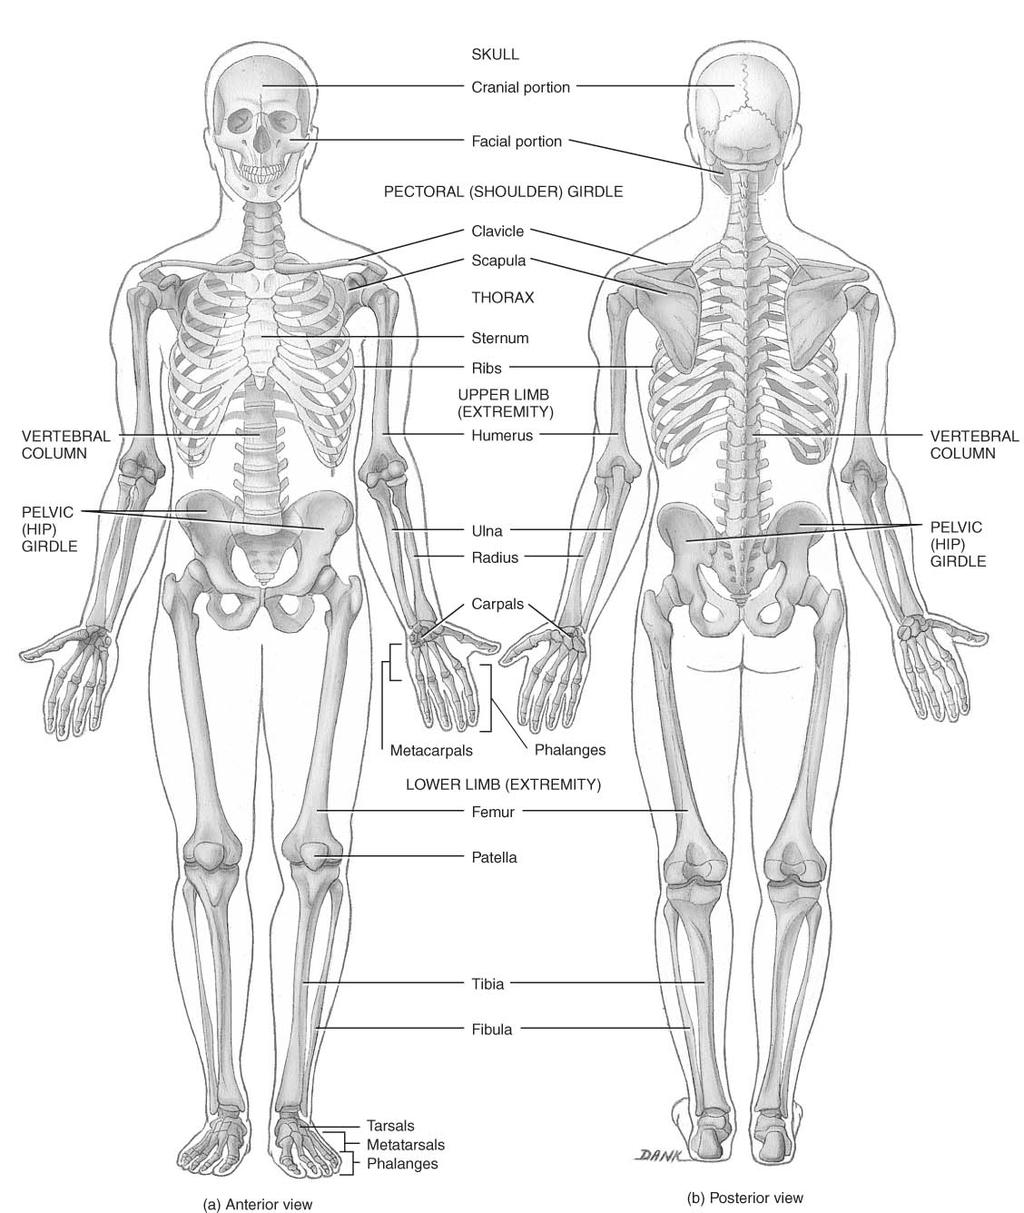 The Appendicular Skeleton Chapter 8B The Skeletal System: Appendicular Skeleton 126 bones Pectoral (shoulder) girdle Pelvic (hip) girdle Upper limbs Lower limbs Functions primarily to facilitate